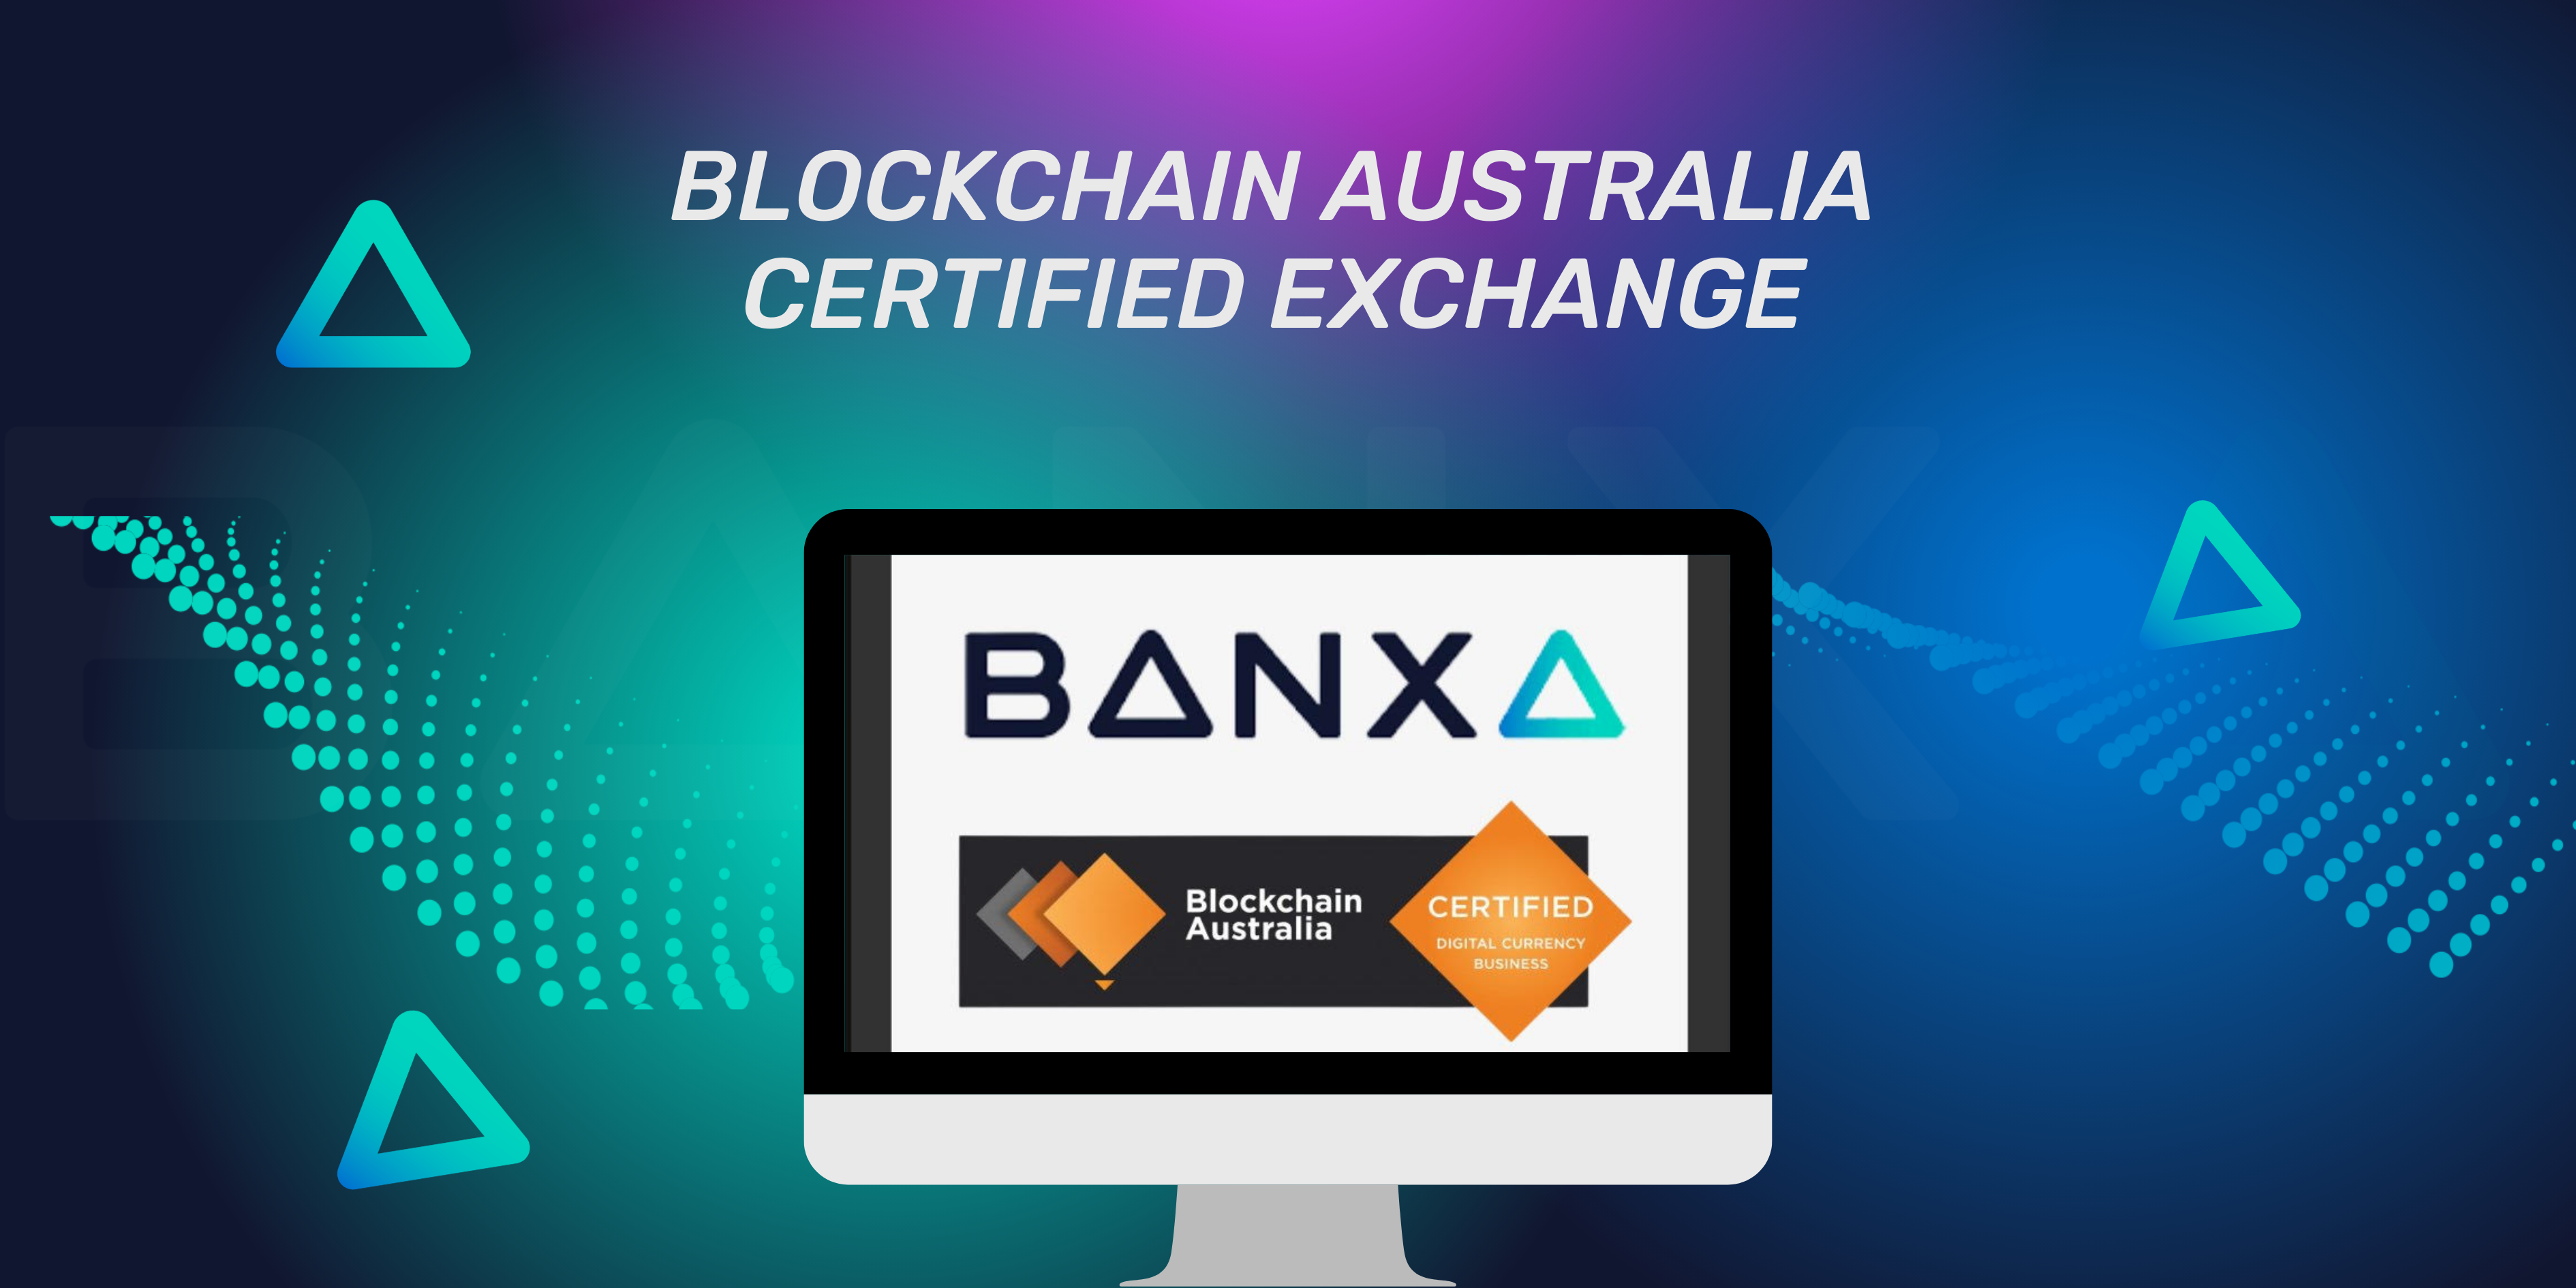 Certification achieved for Banxa under the Australian Digital Currency Industry Code of Conduct